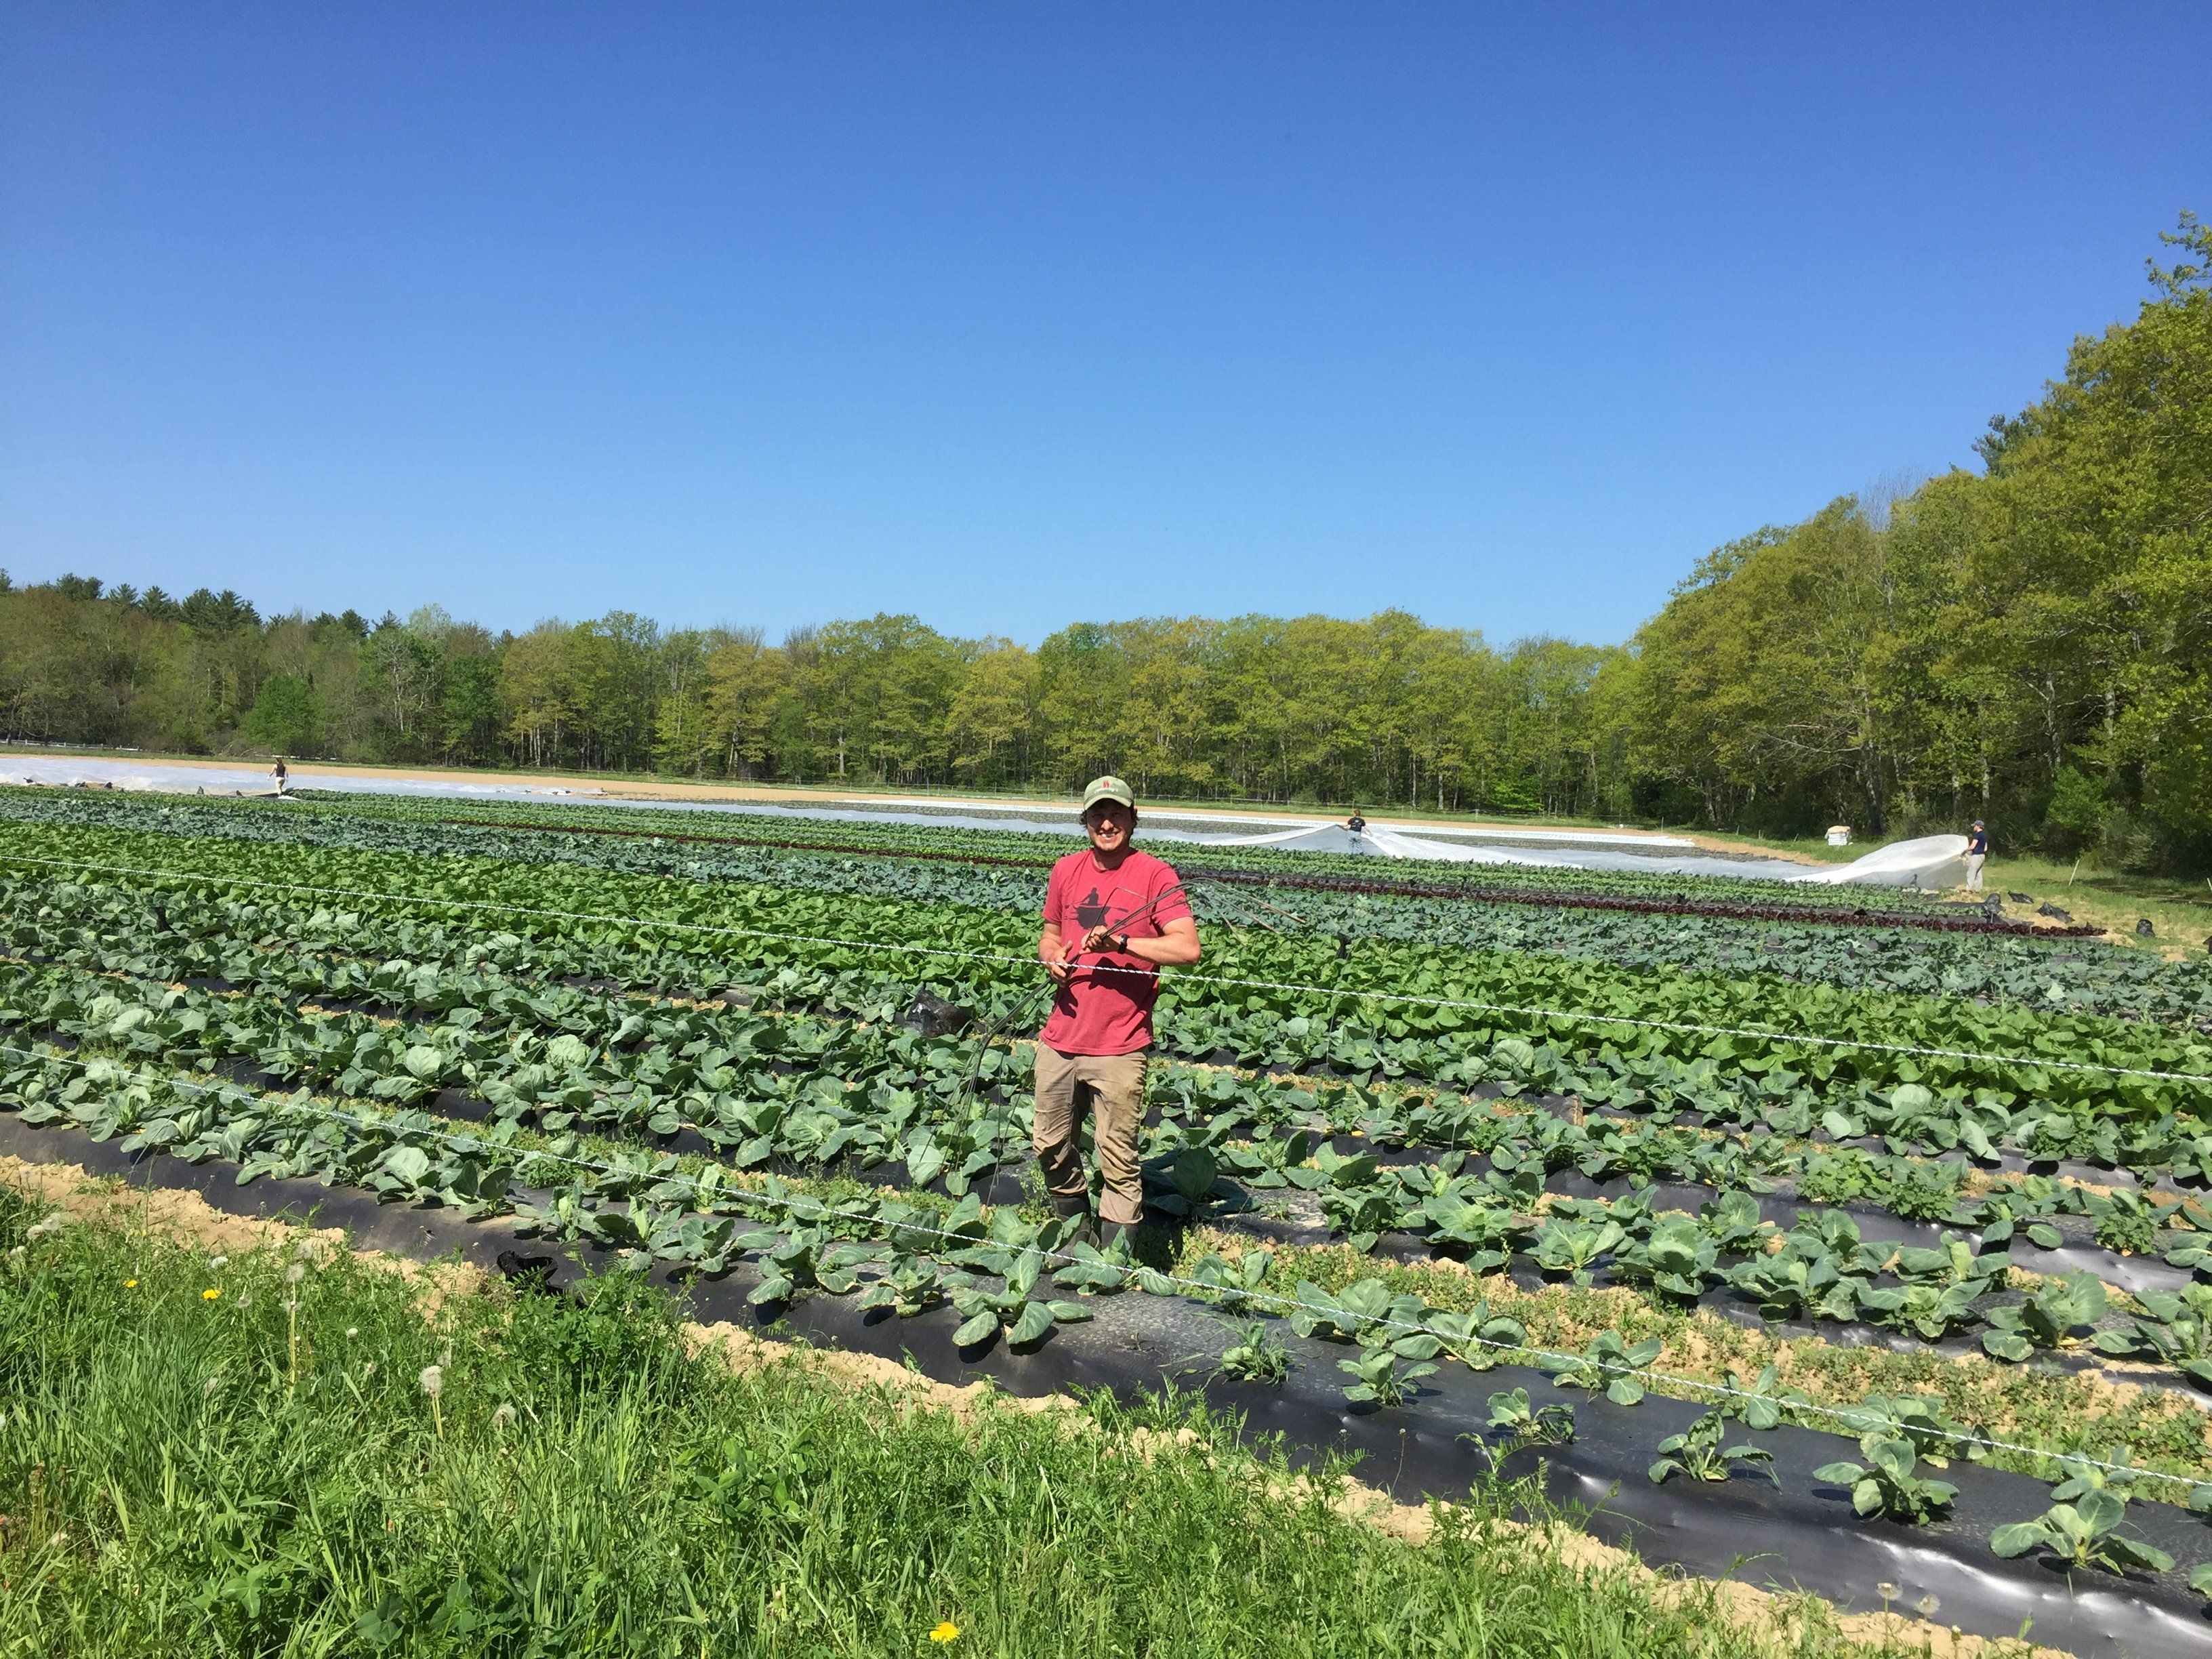 Previous Happening: Shares Begin!  Farm and Share update for June 10th/11th Delivery